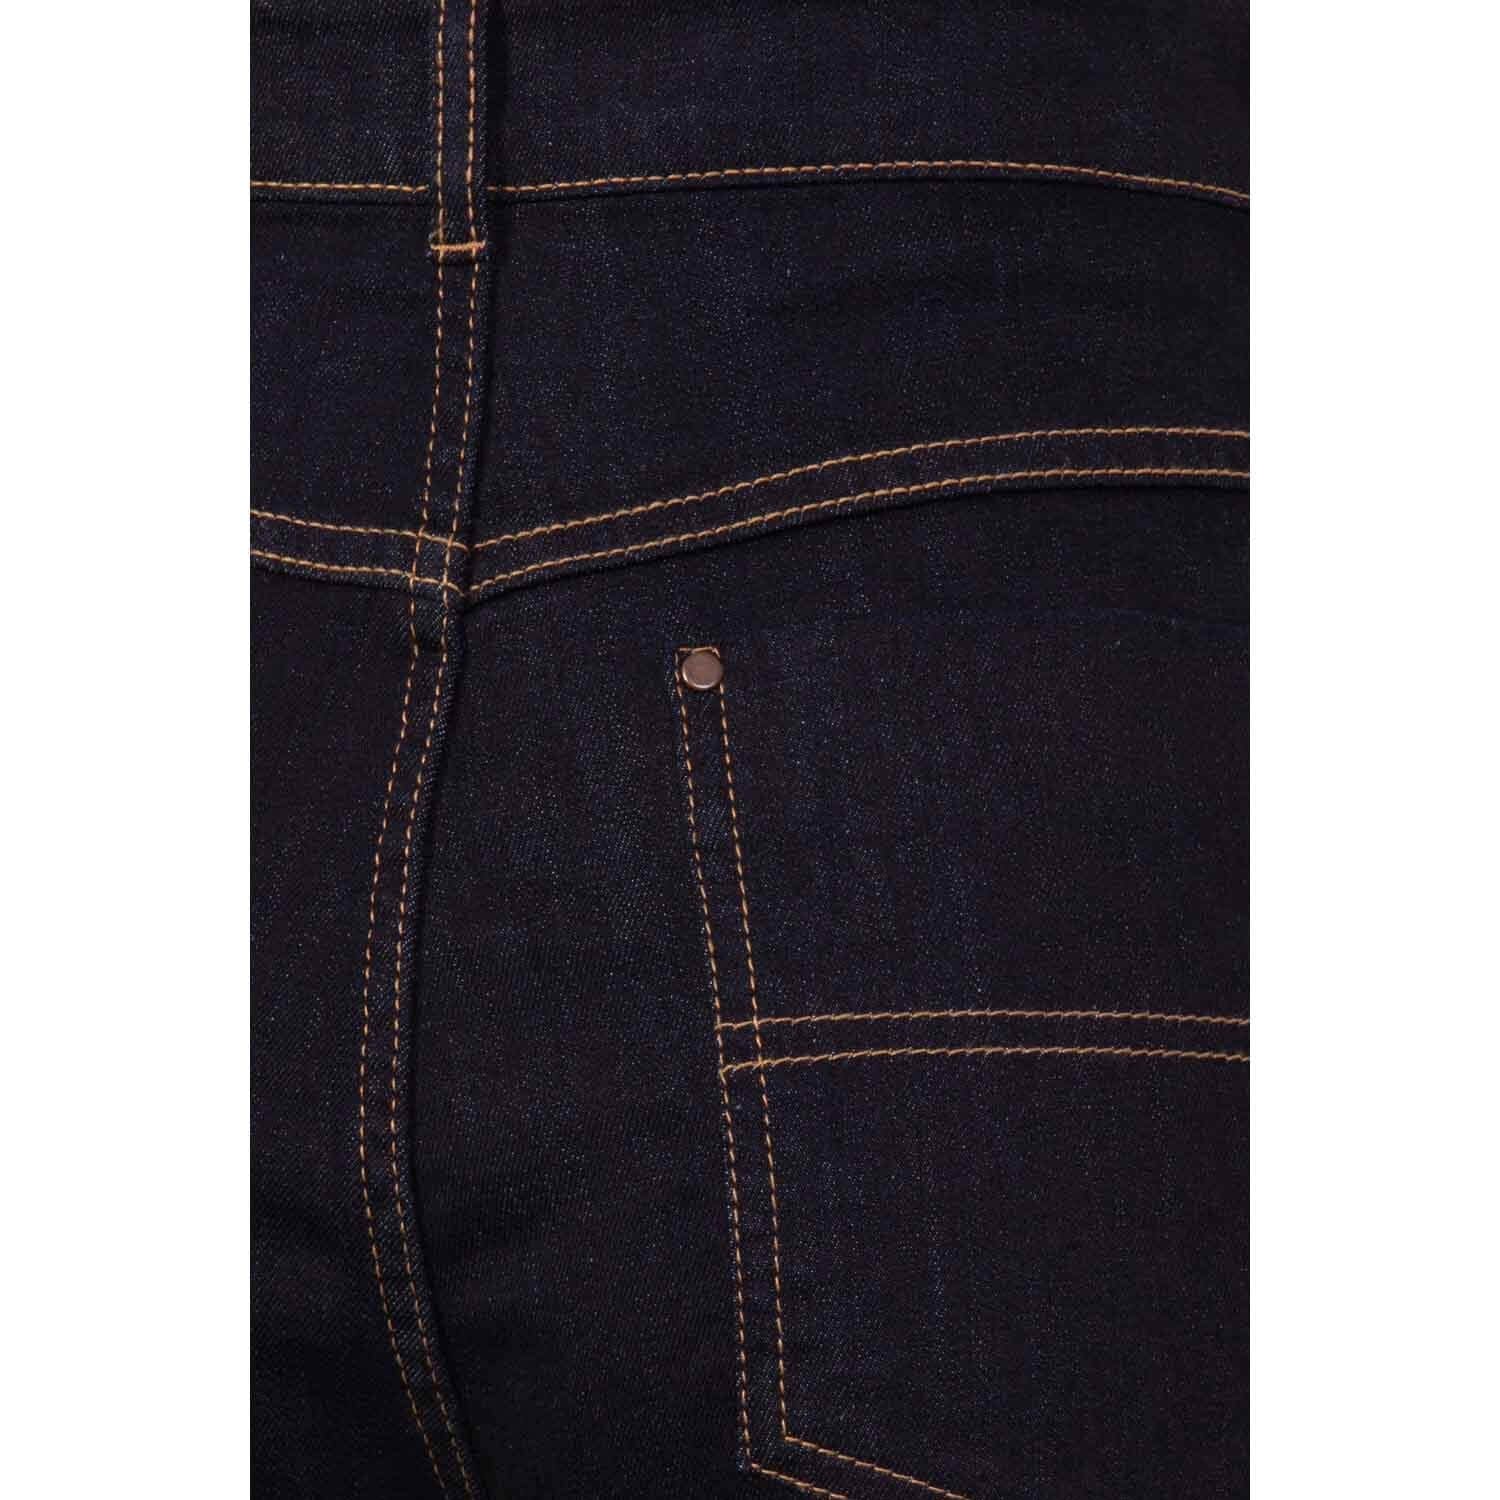 Image of Hell Bunny Weston Denim Jeans - Navy Blue